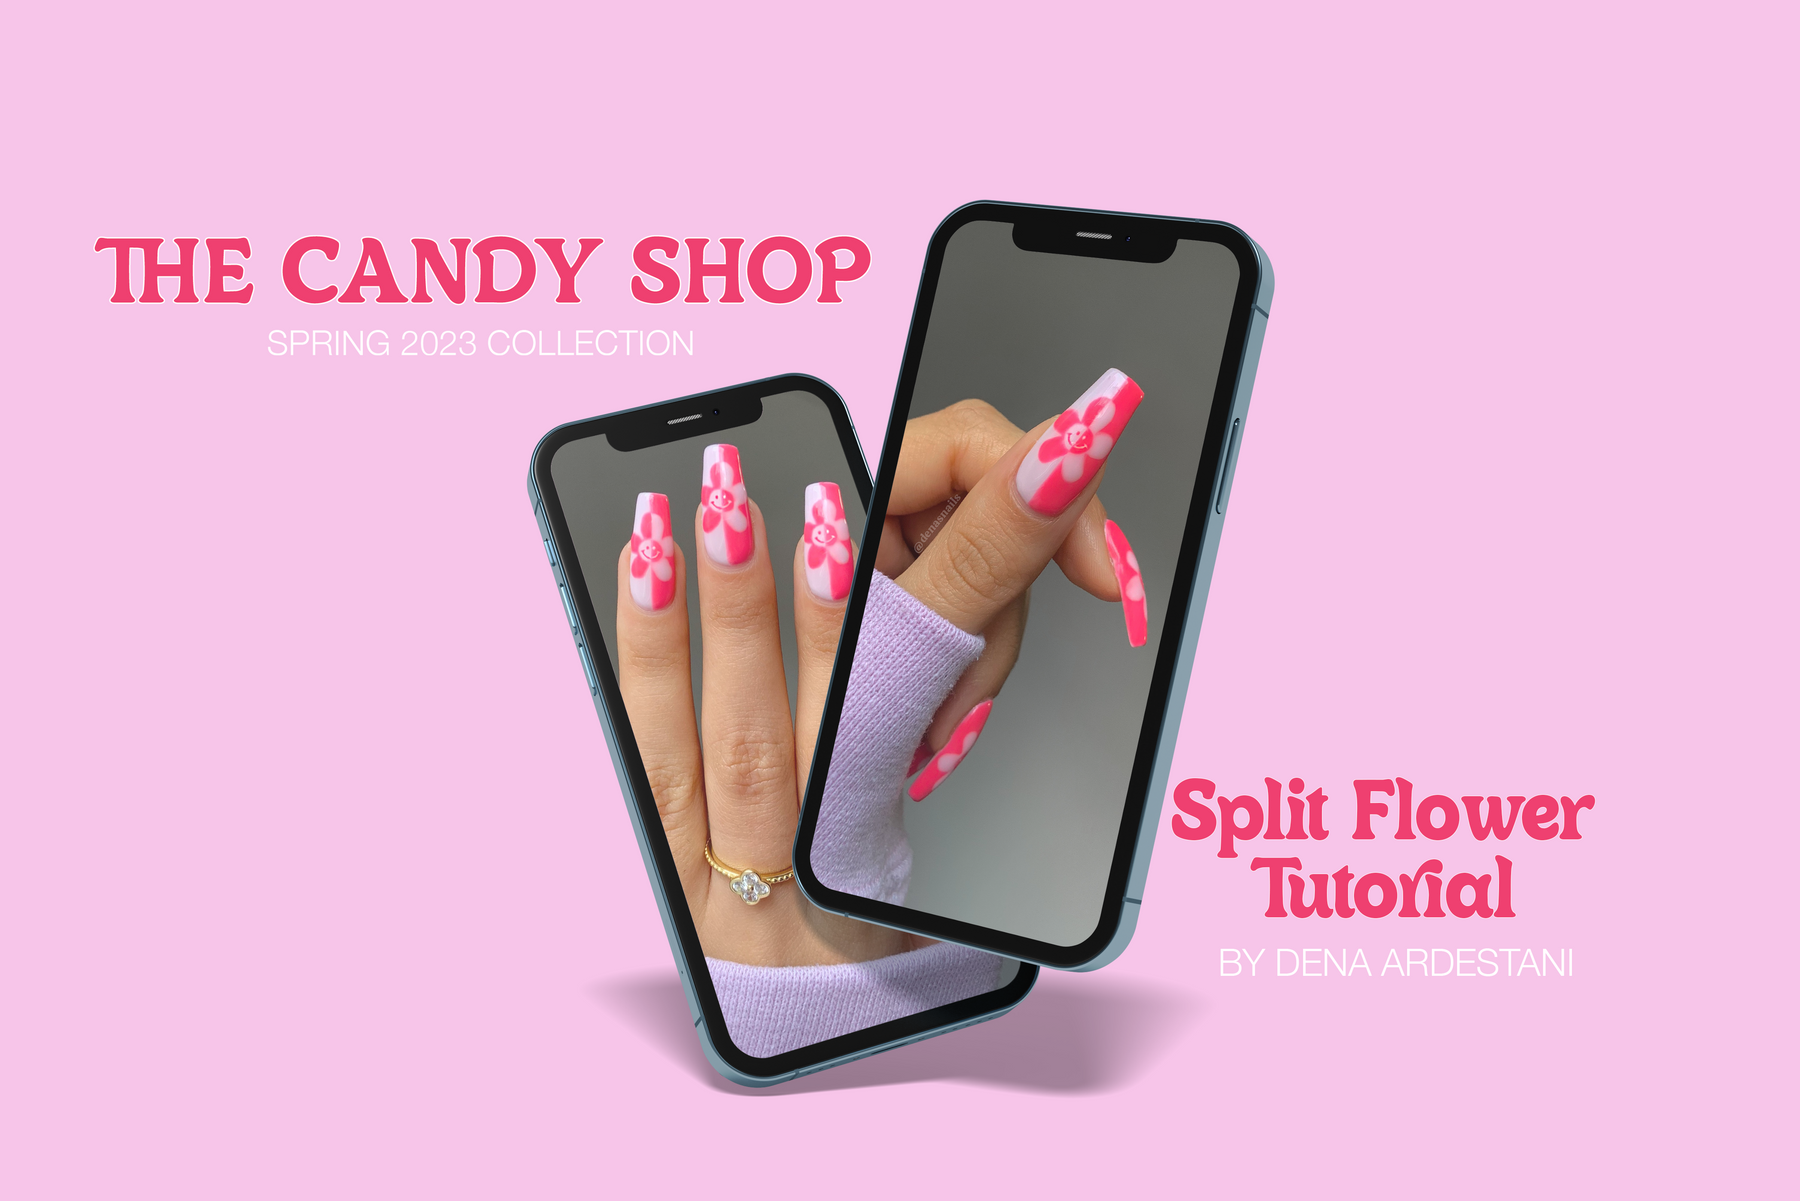 Split Smiley Flower Nail Tutorial by Denas Nails using The Candy Shop Collection